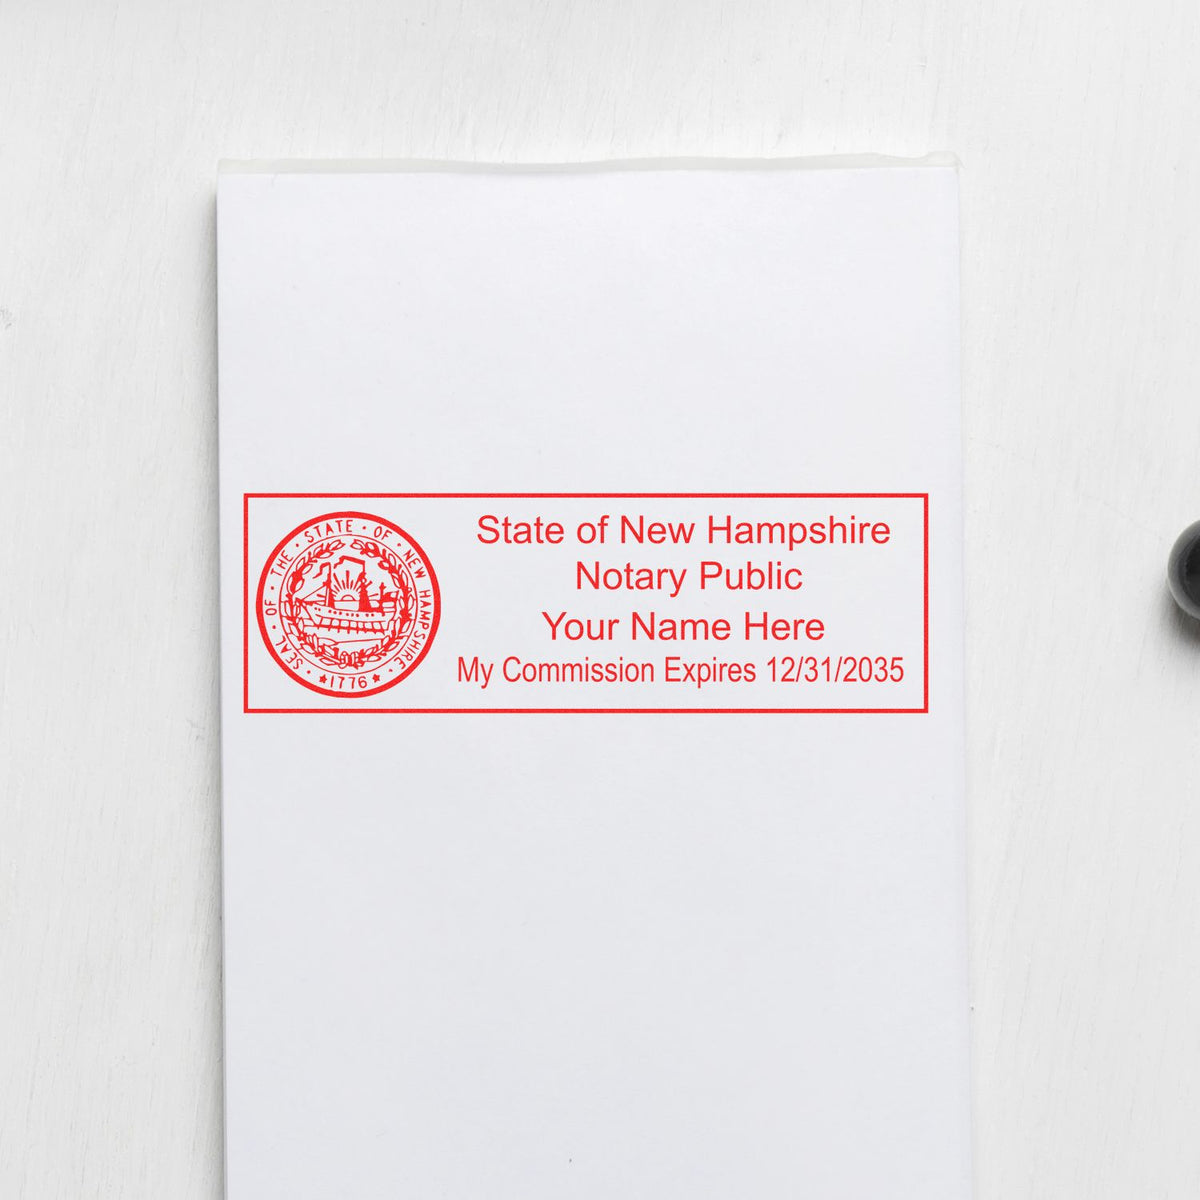 An alternative view of the Slim Pre-Inked State Seal Notary Stamp for New Hampshire stamped on a sheet of paper showing the image in use